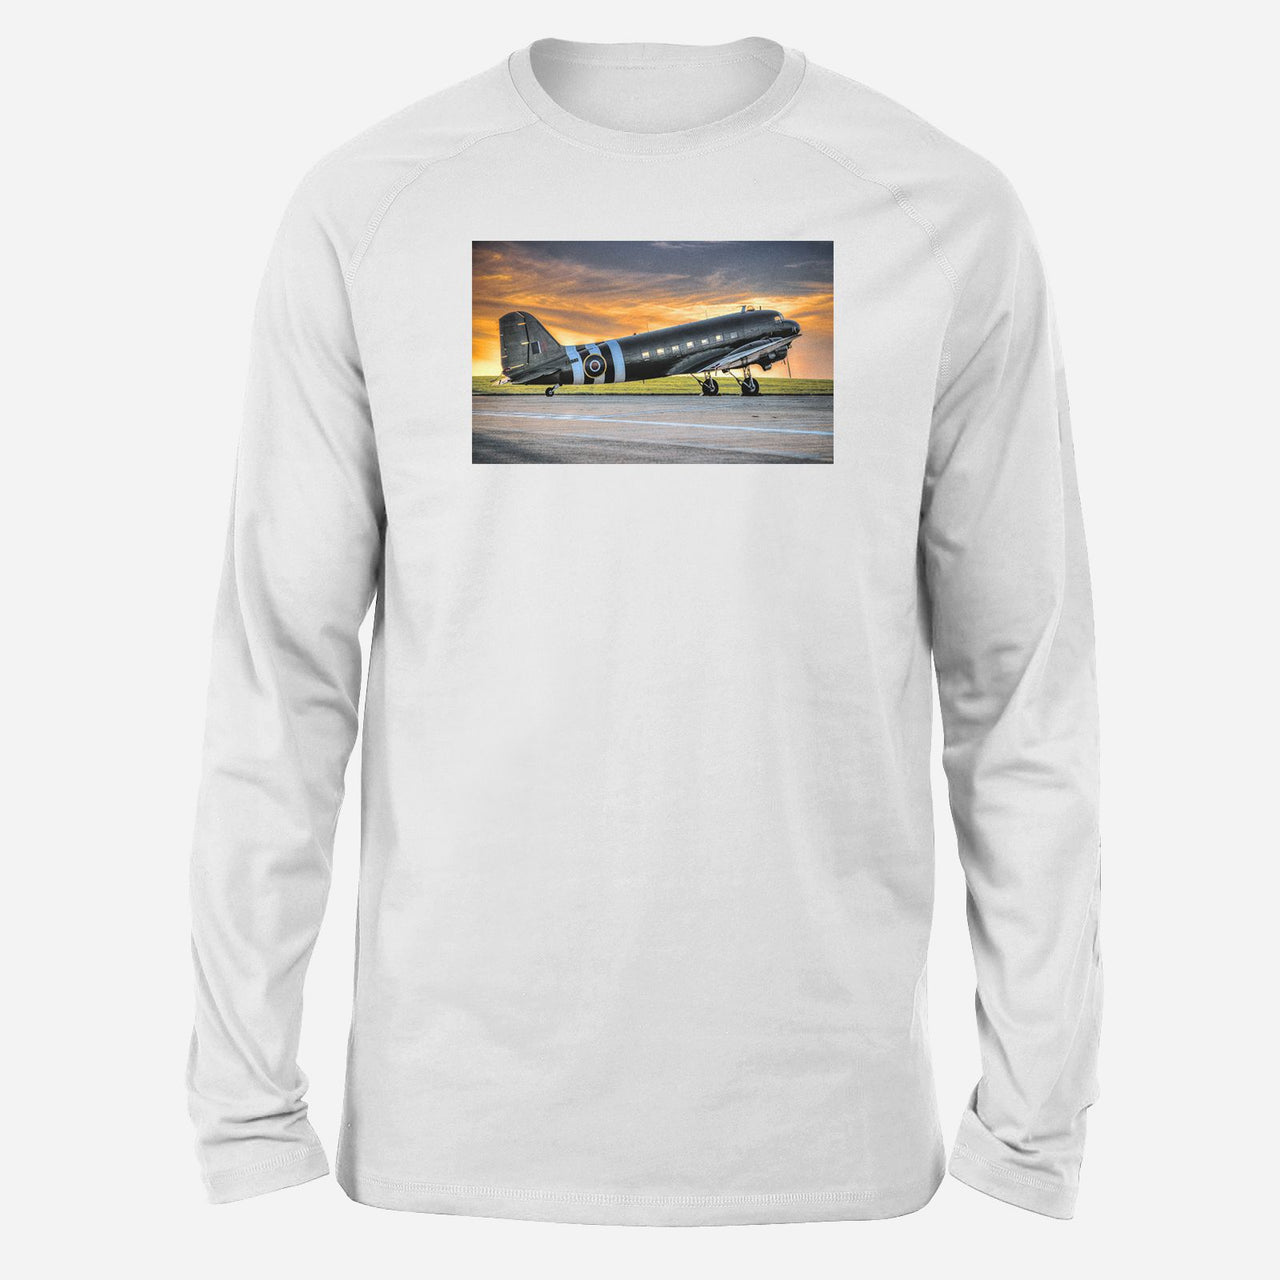 Old Airplane Parked During Sunset Designed Long-Sleeve T-Shirts